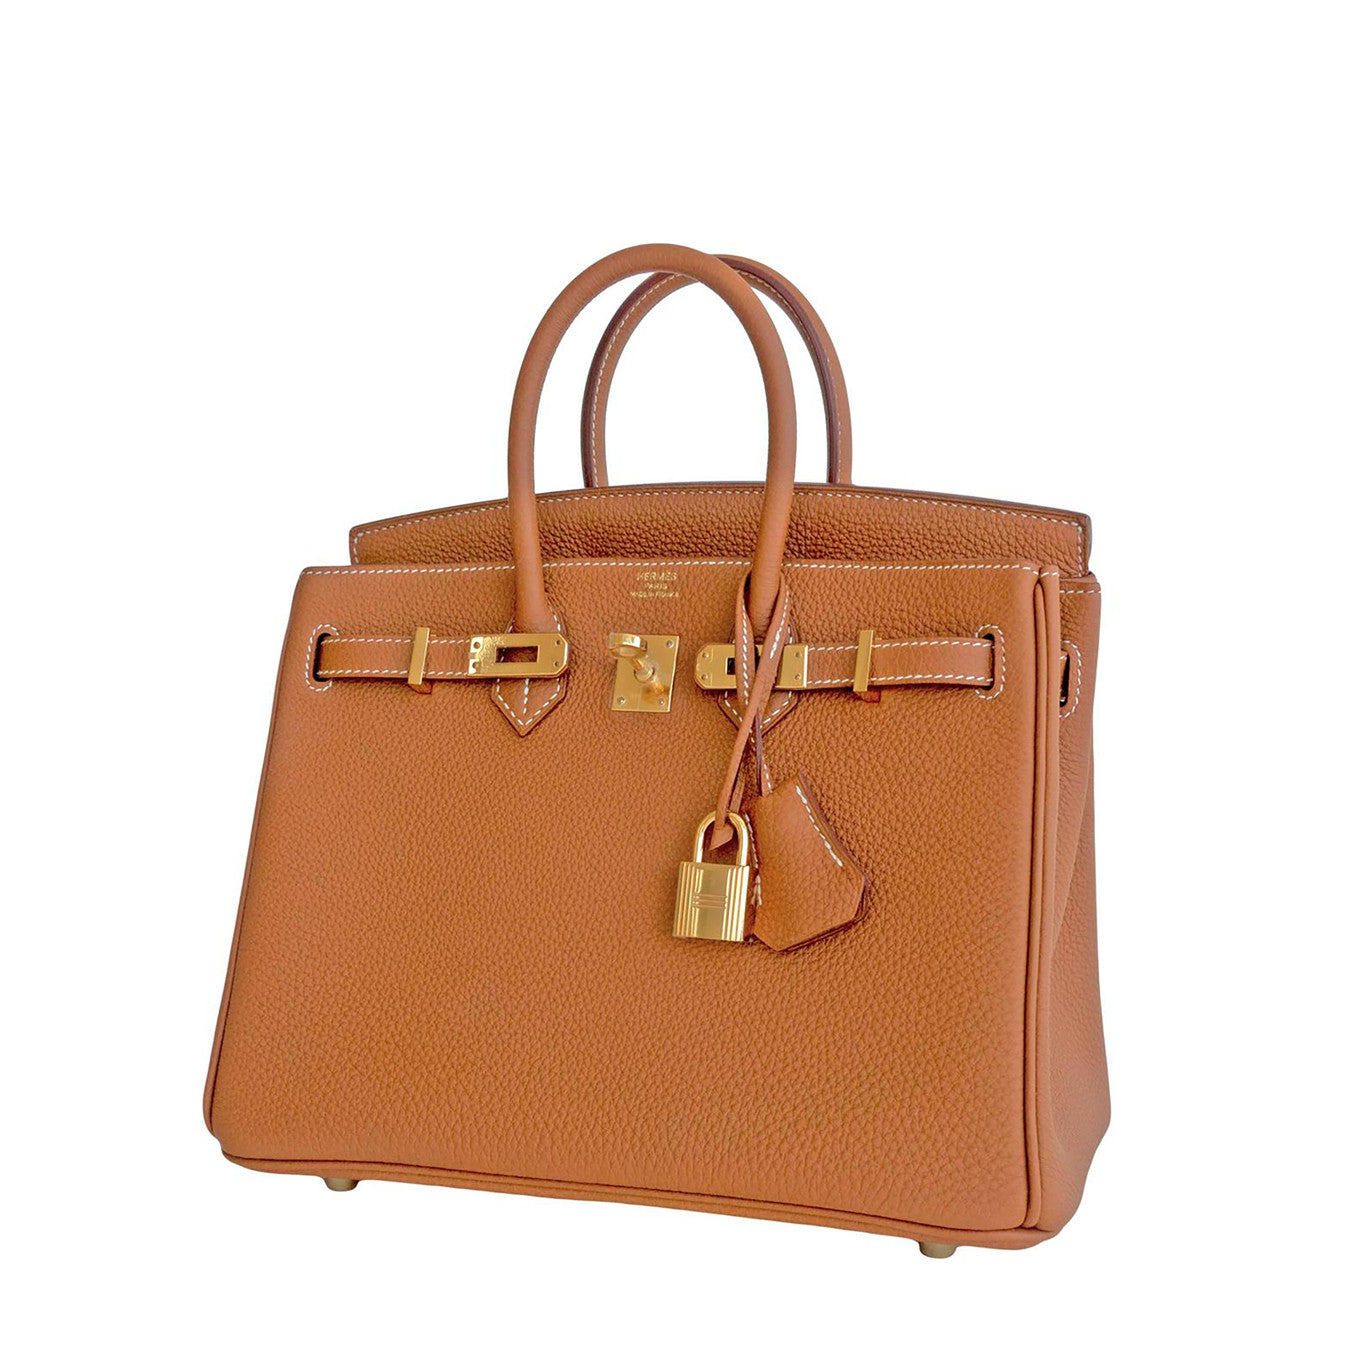 Hermes Birkin 25 Bag in Togo Leather with Gold Hardware-Brown